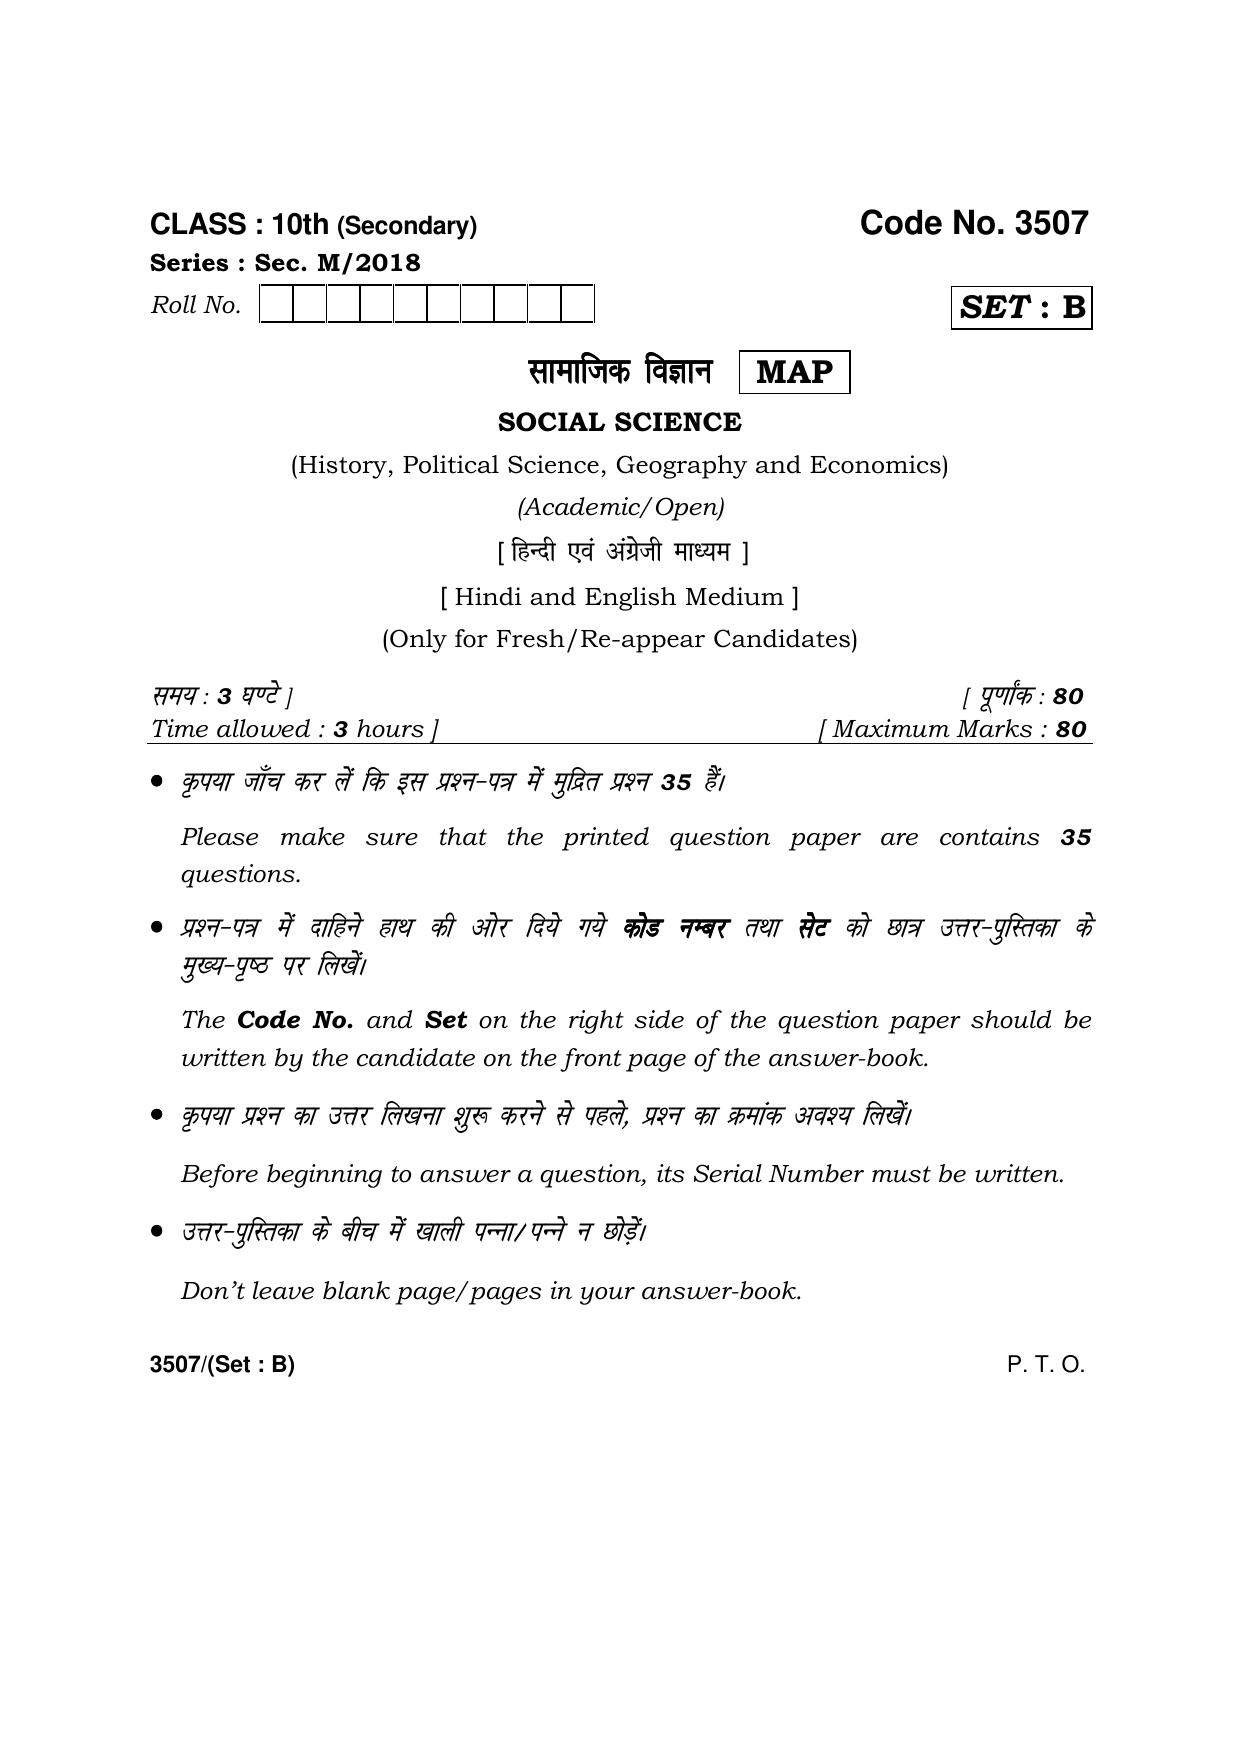 Haryana Board HBSE Class 10 Social Science -B 2018 Question Paper - Page 1